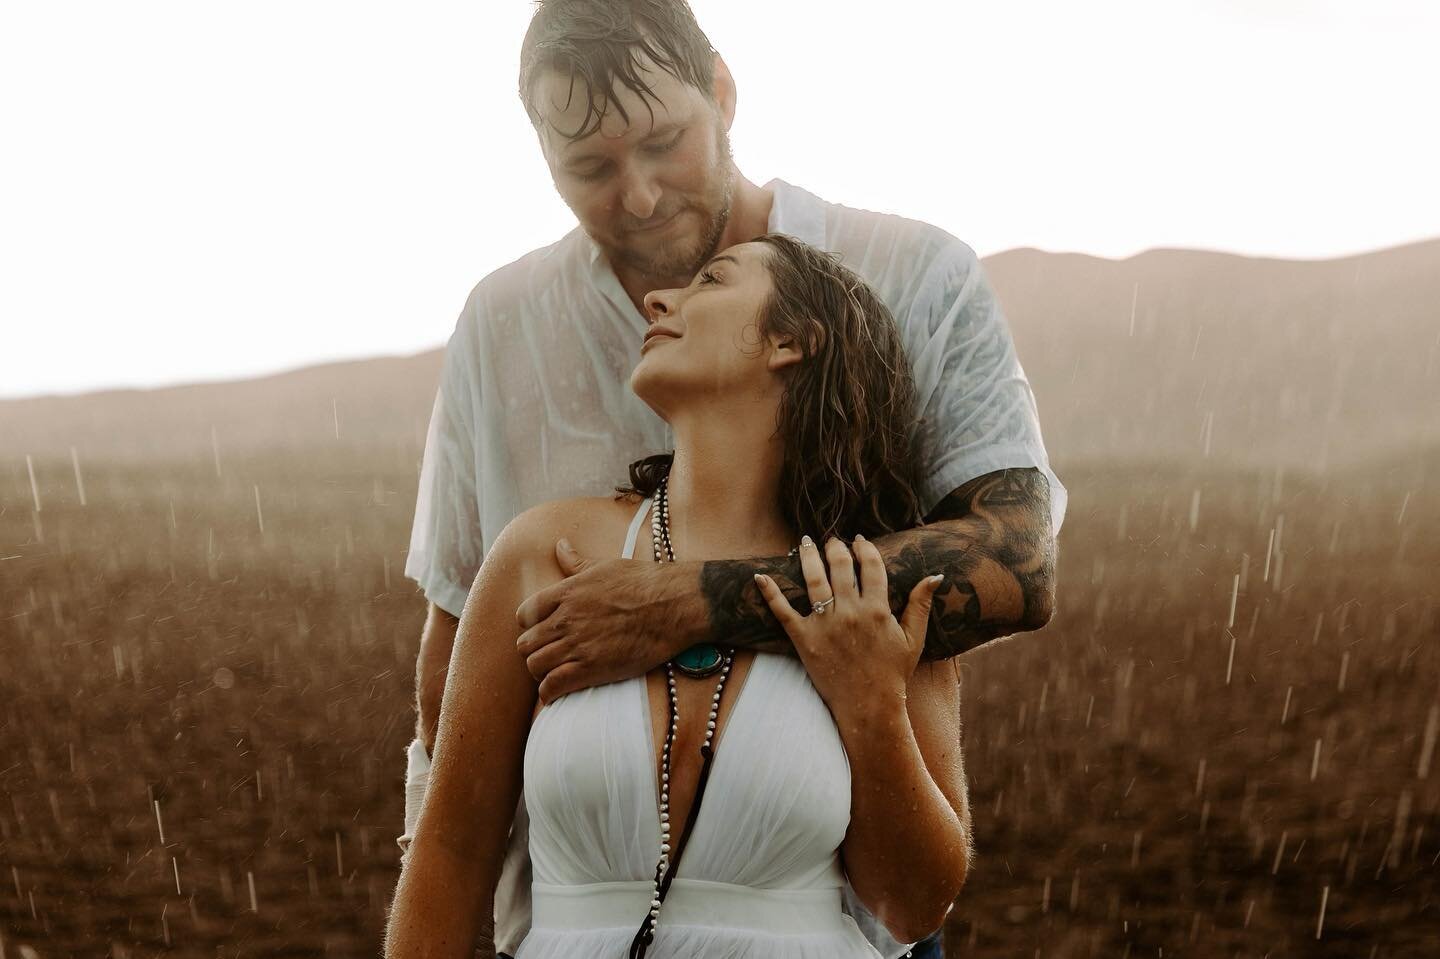 Stunning engagement photoshoot with lively&rsquo;s own, Nikkolette! Congratulations to the beautiful couple! She wore a @ pearl strand with a vintage Tibetan silver and turquoise pendant. We just can&rsquo;t get over these dreamy shots 😍
.
.
.

#liv